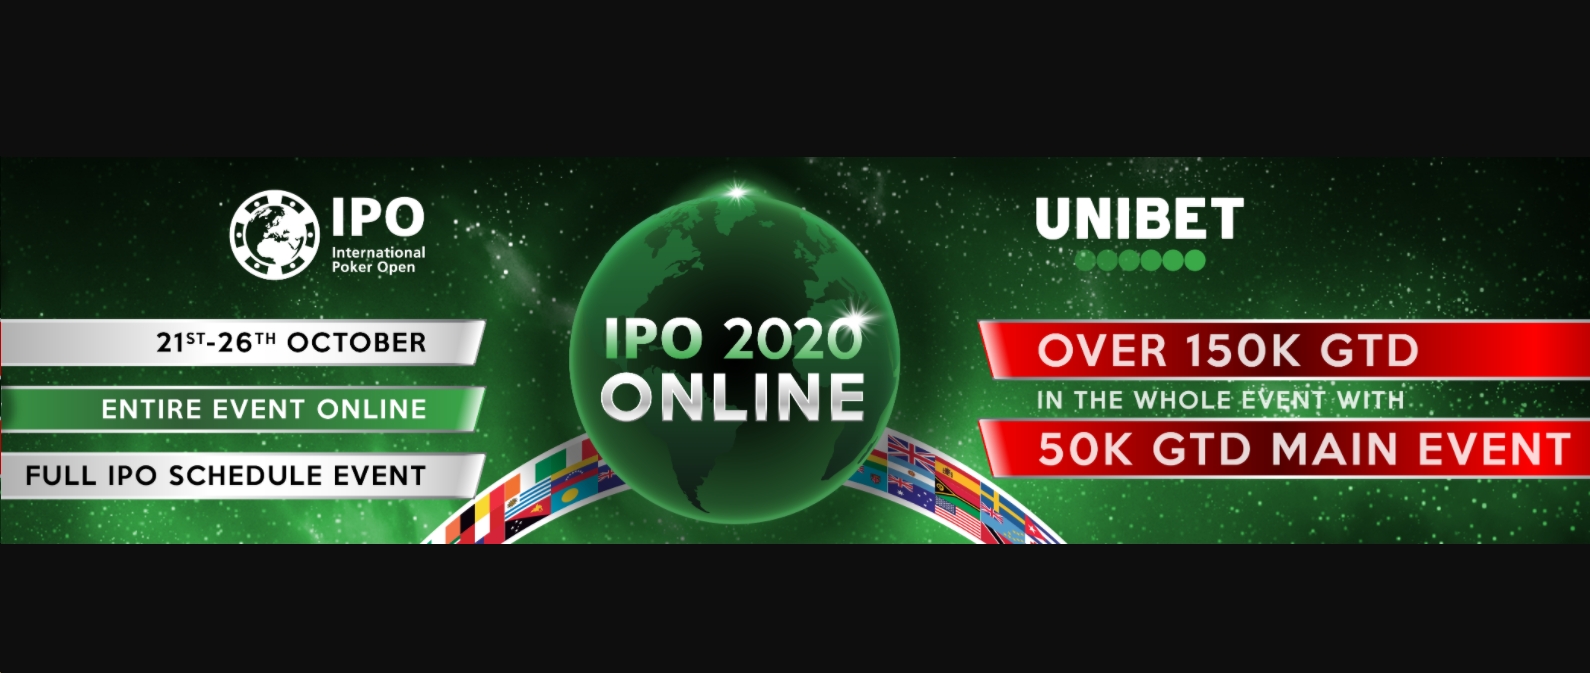 IPO 2020